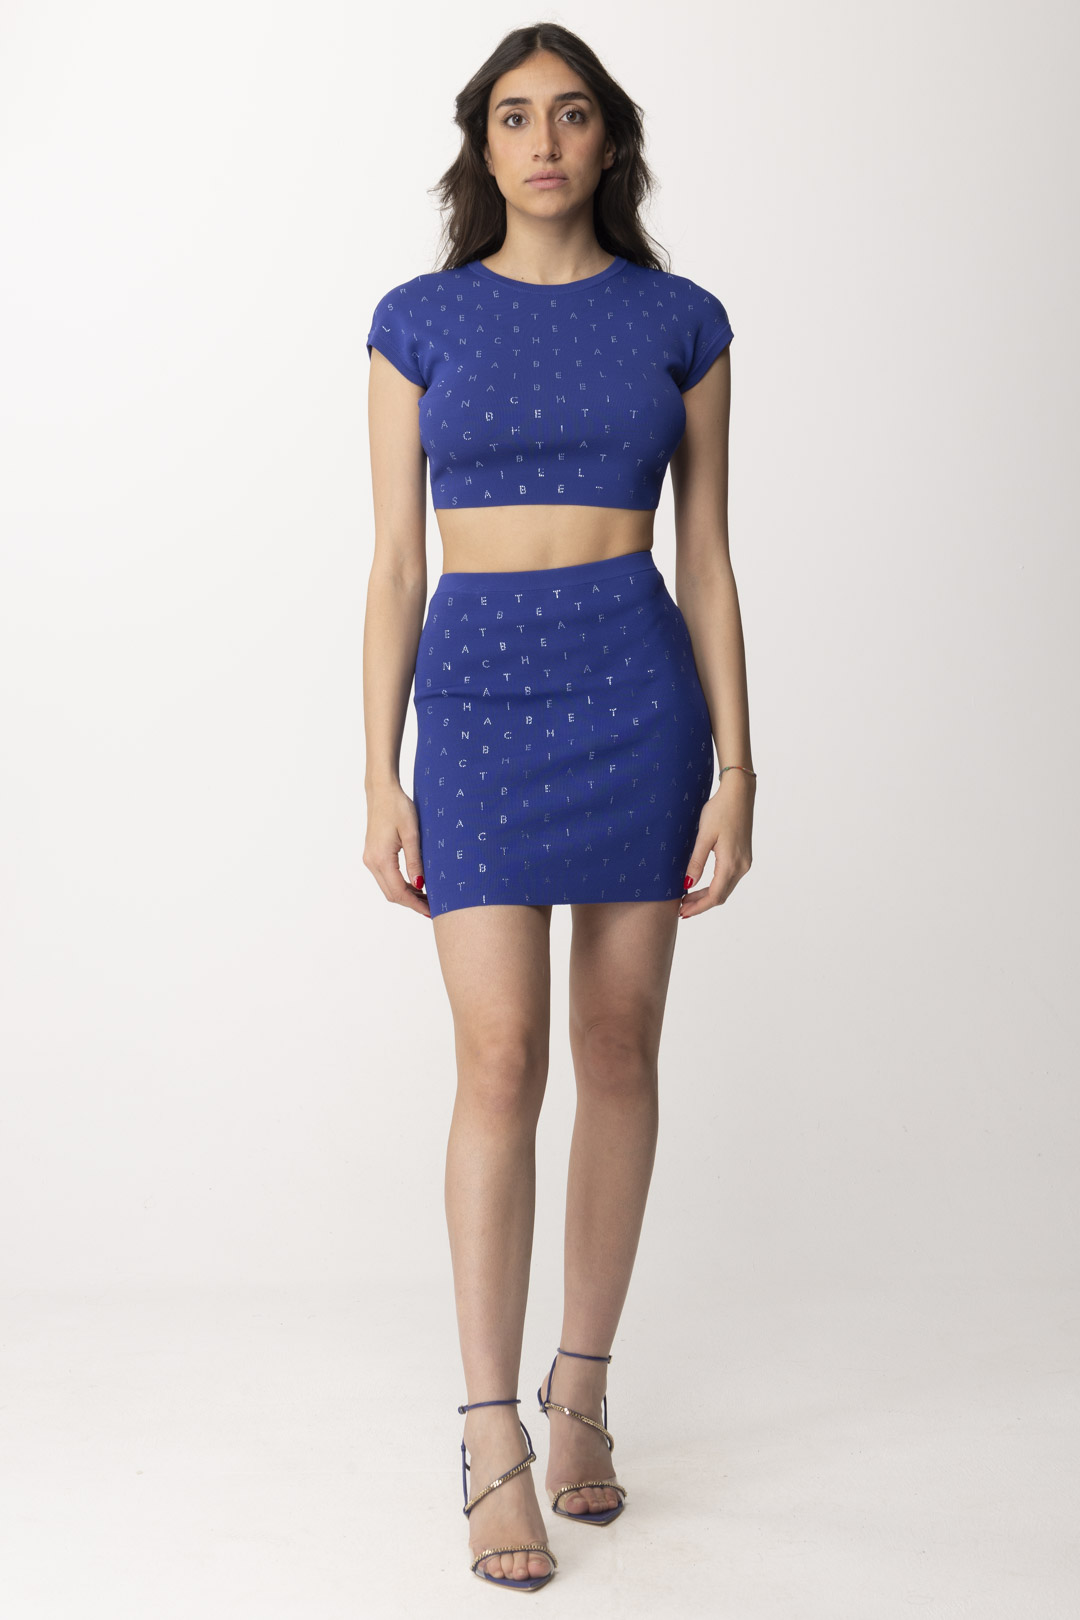 Preview: Elisabetta Franchi Miniskirt with Rhinestone Lettering BLUE INDACO